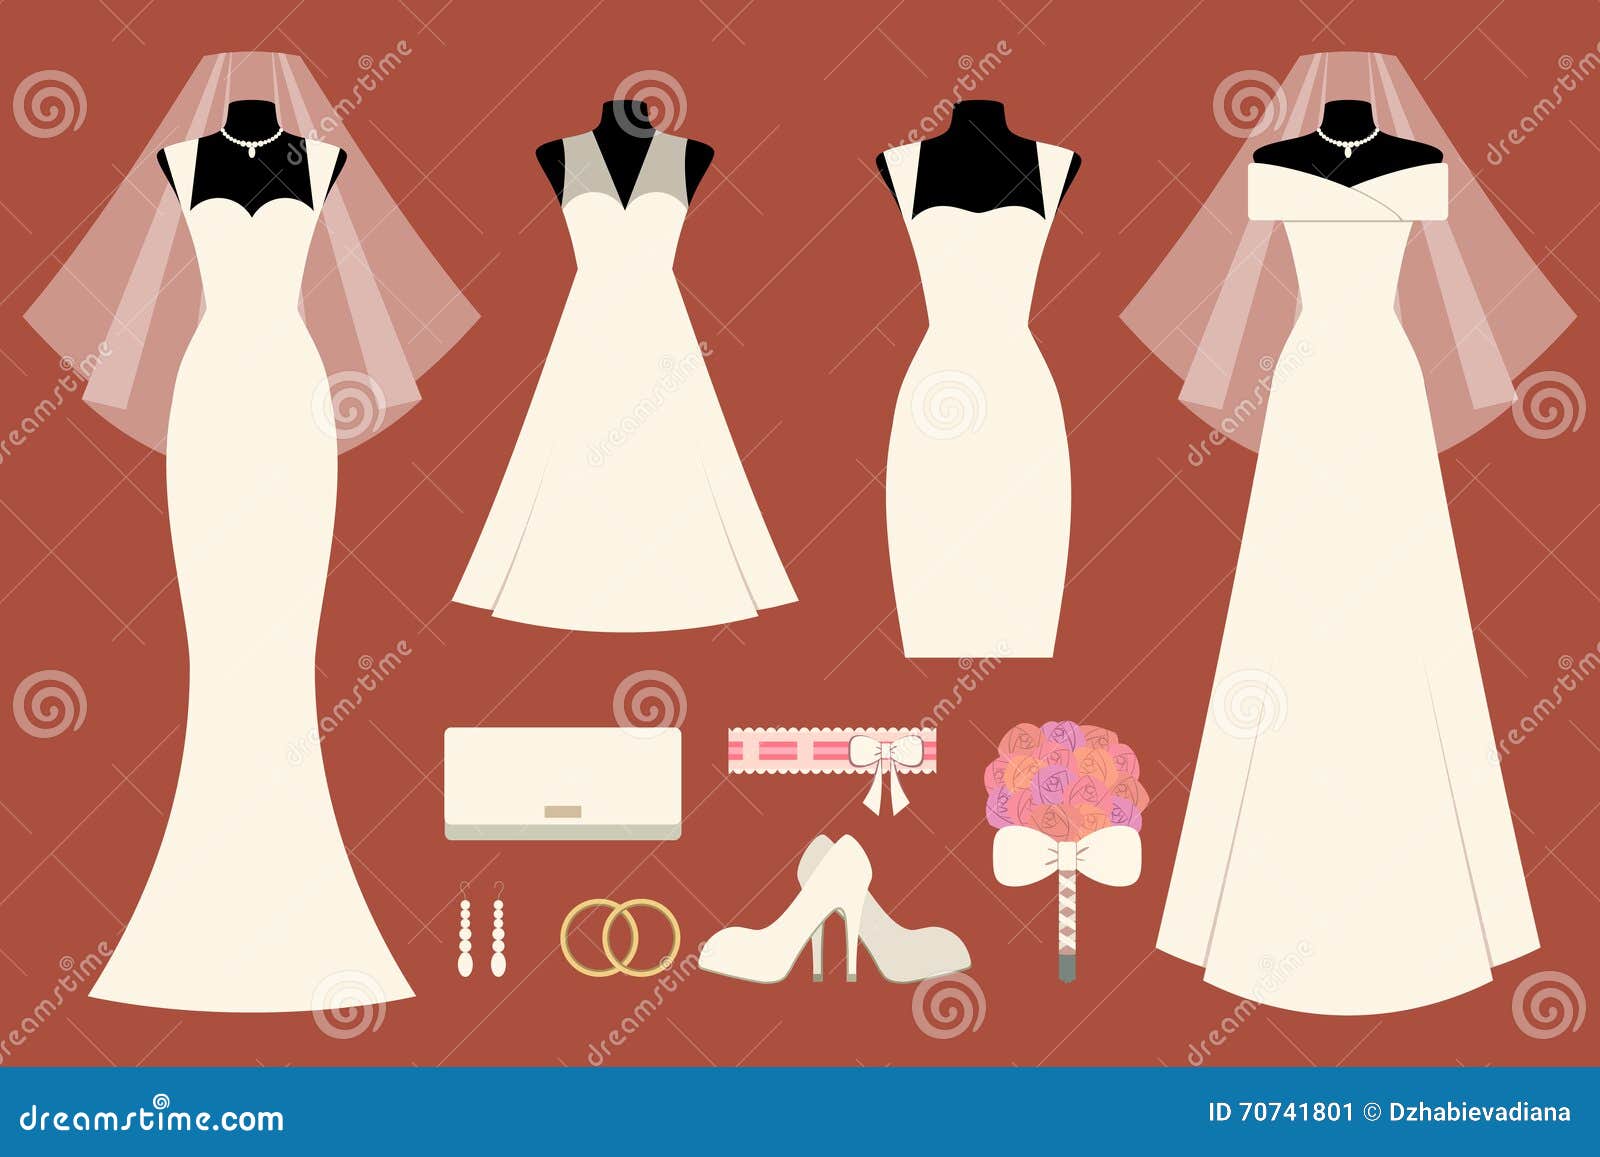 https://thumbs.dreamstime.com/z/wedding-dresses-accessories-vector-icon-set-bridal-clothes-types-long-short-shoes-bag-clutch-jewelry-necklace-70741801.jpg